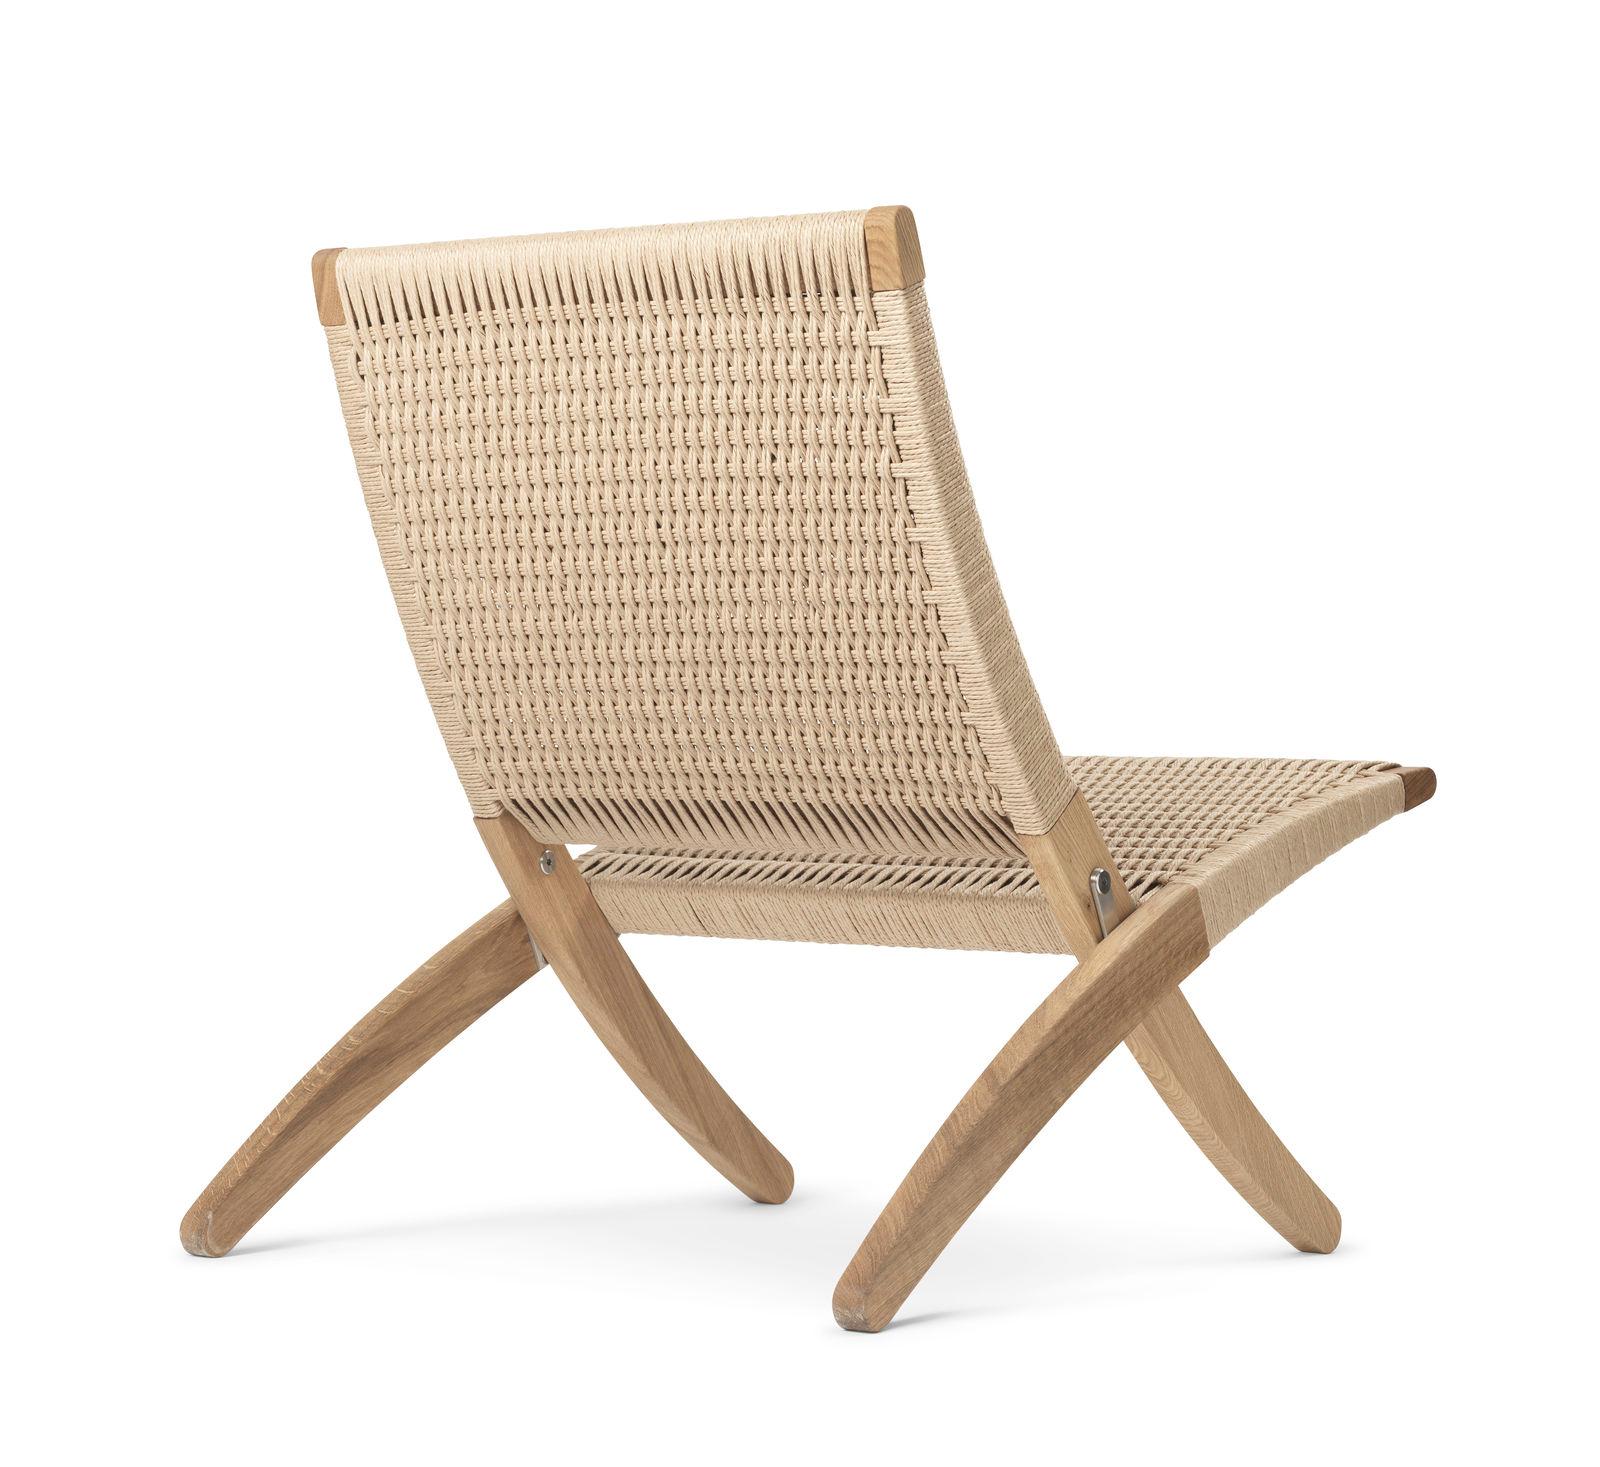 The MG501 Cuba chair by Morten GÃ¸ttler takes extra seating to a new level. It features a solid oak frame, with the cotton girths around the frame forming a comfortable seat and back and providing excellent support as they gently follow the bodyâ€™s